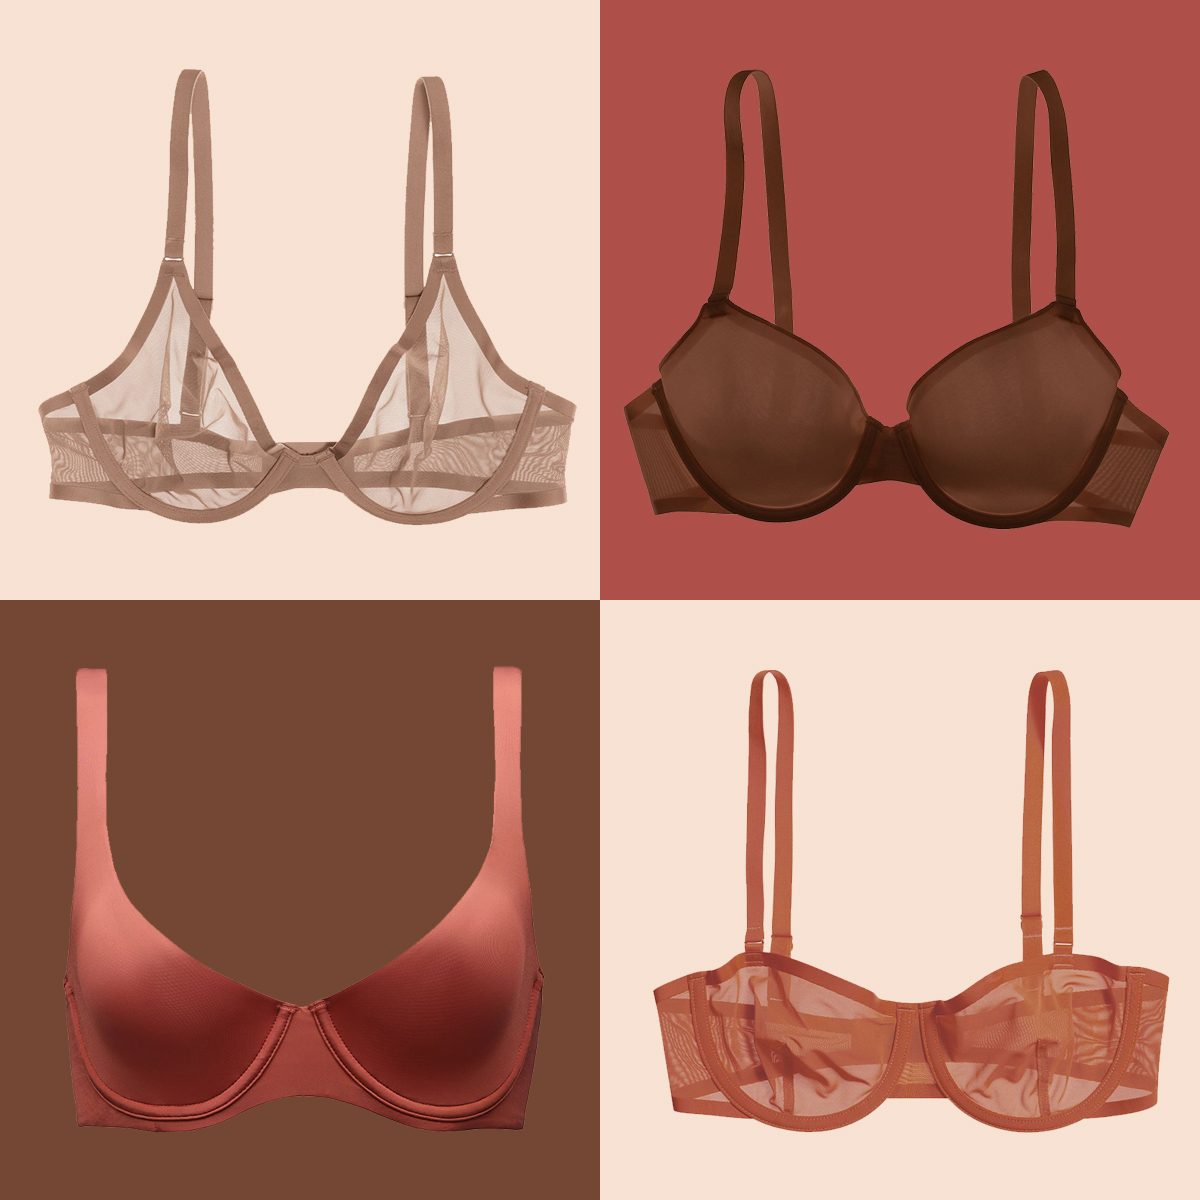 Cuup Bra Sizing Expands To Include Even More Band Sizes